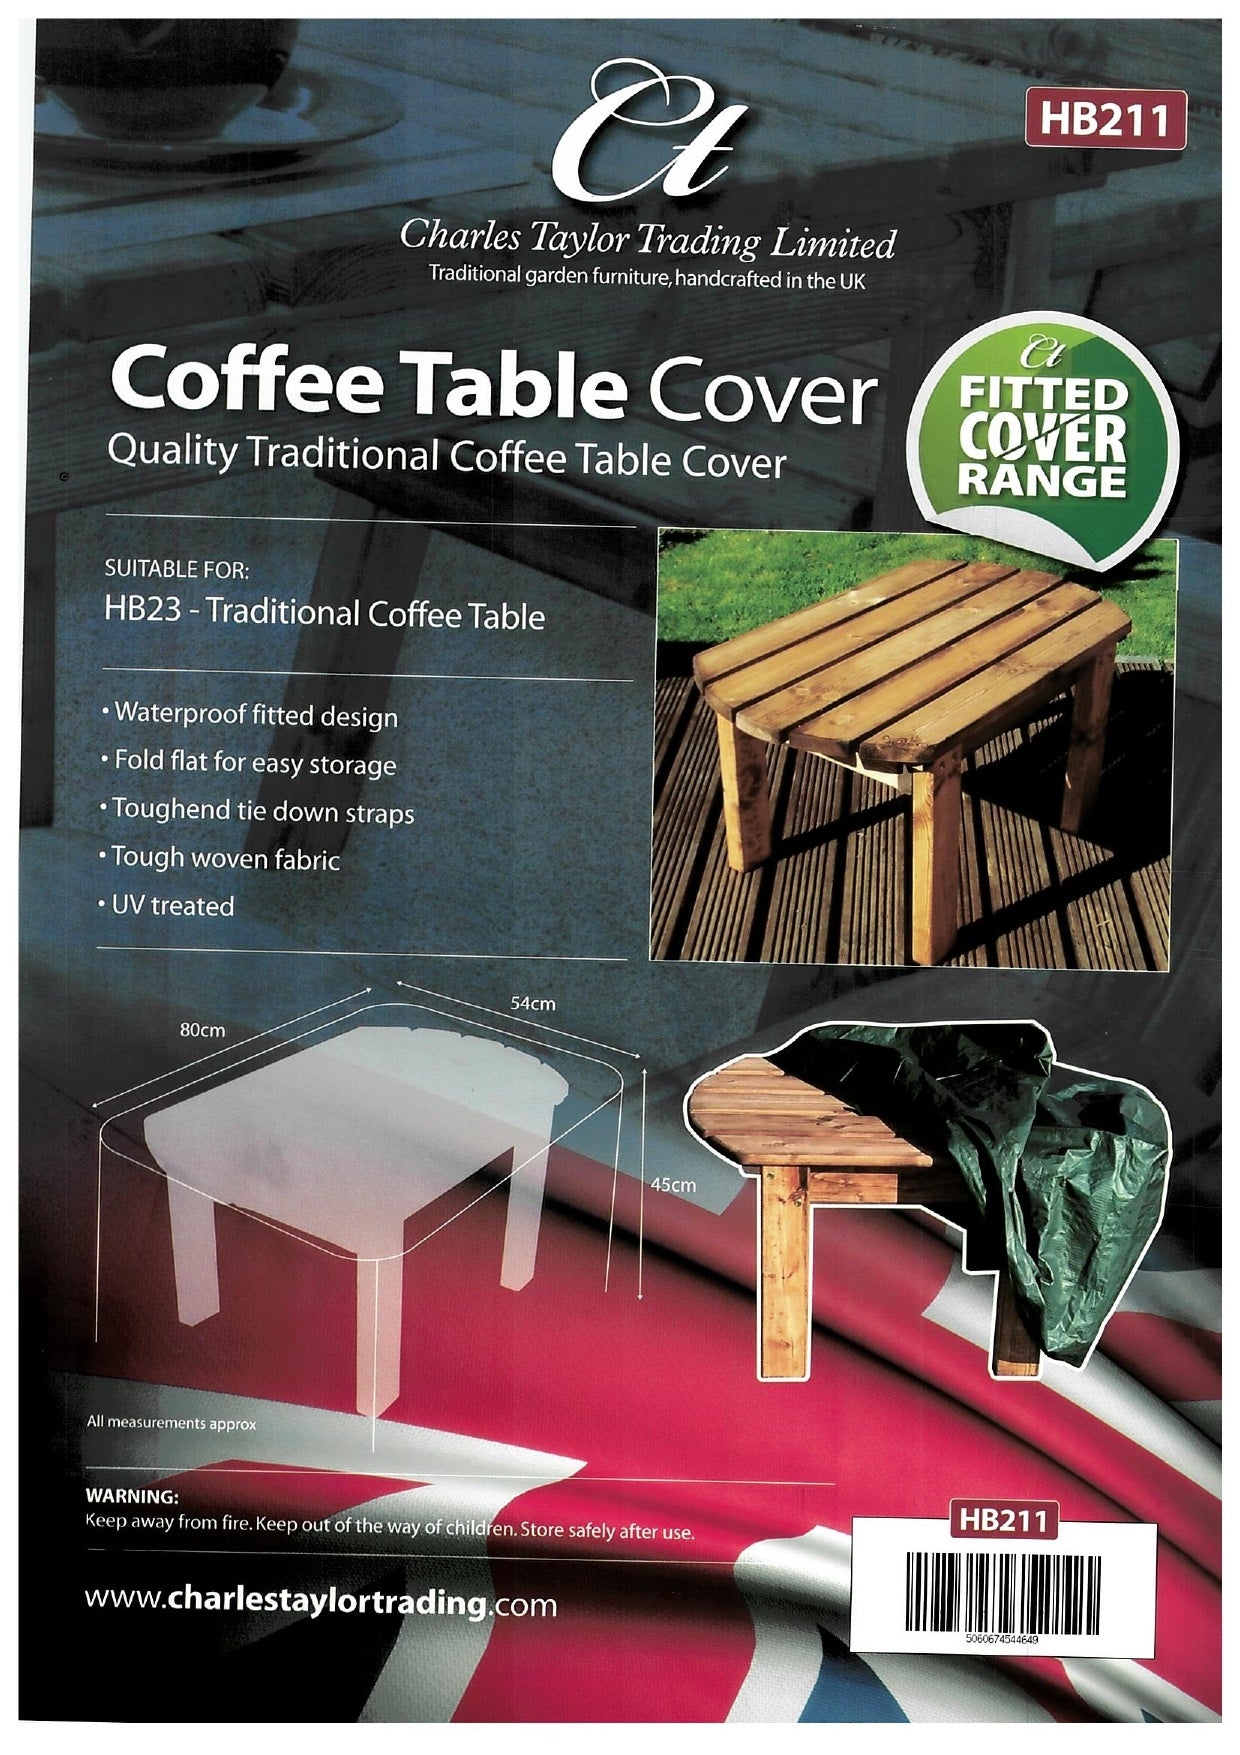 HB211 - Coffee Table Cover